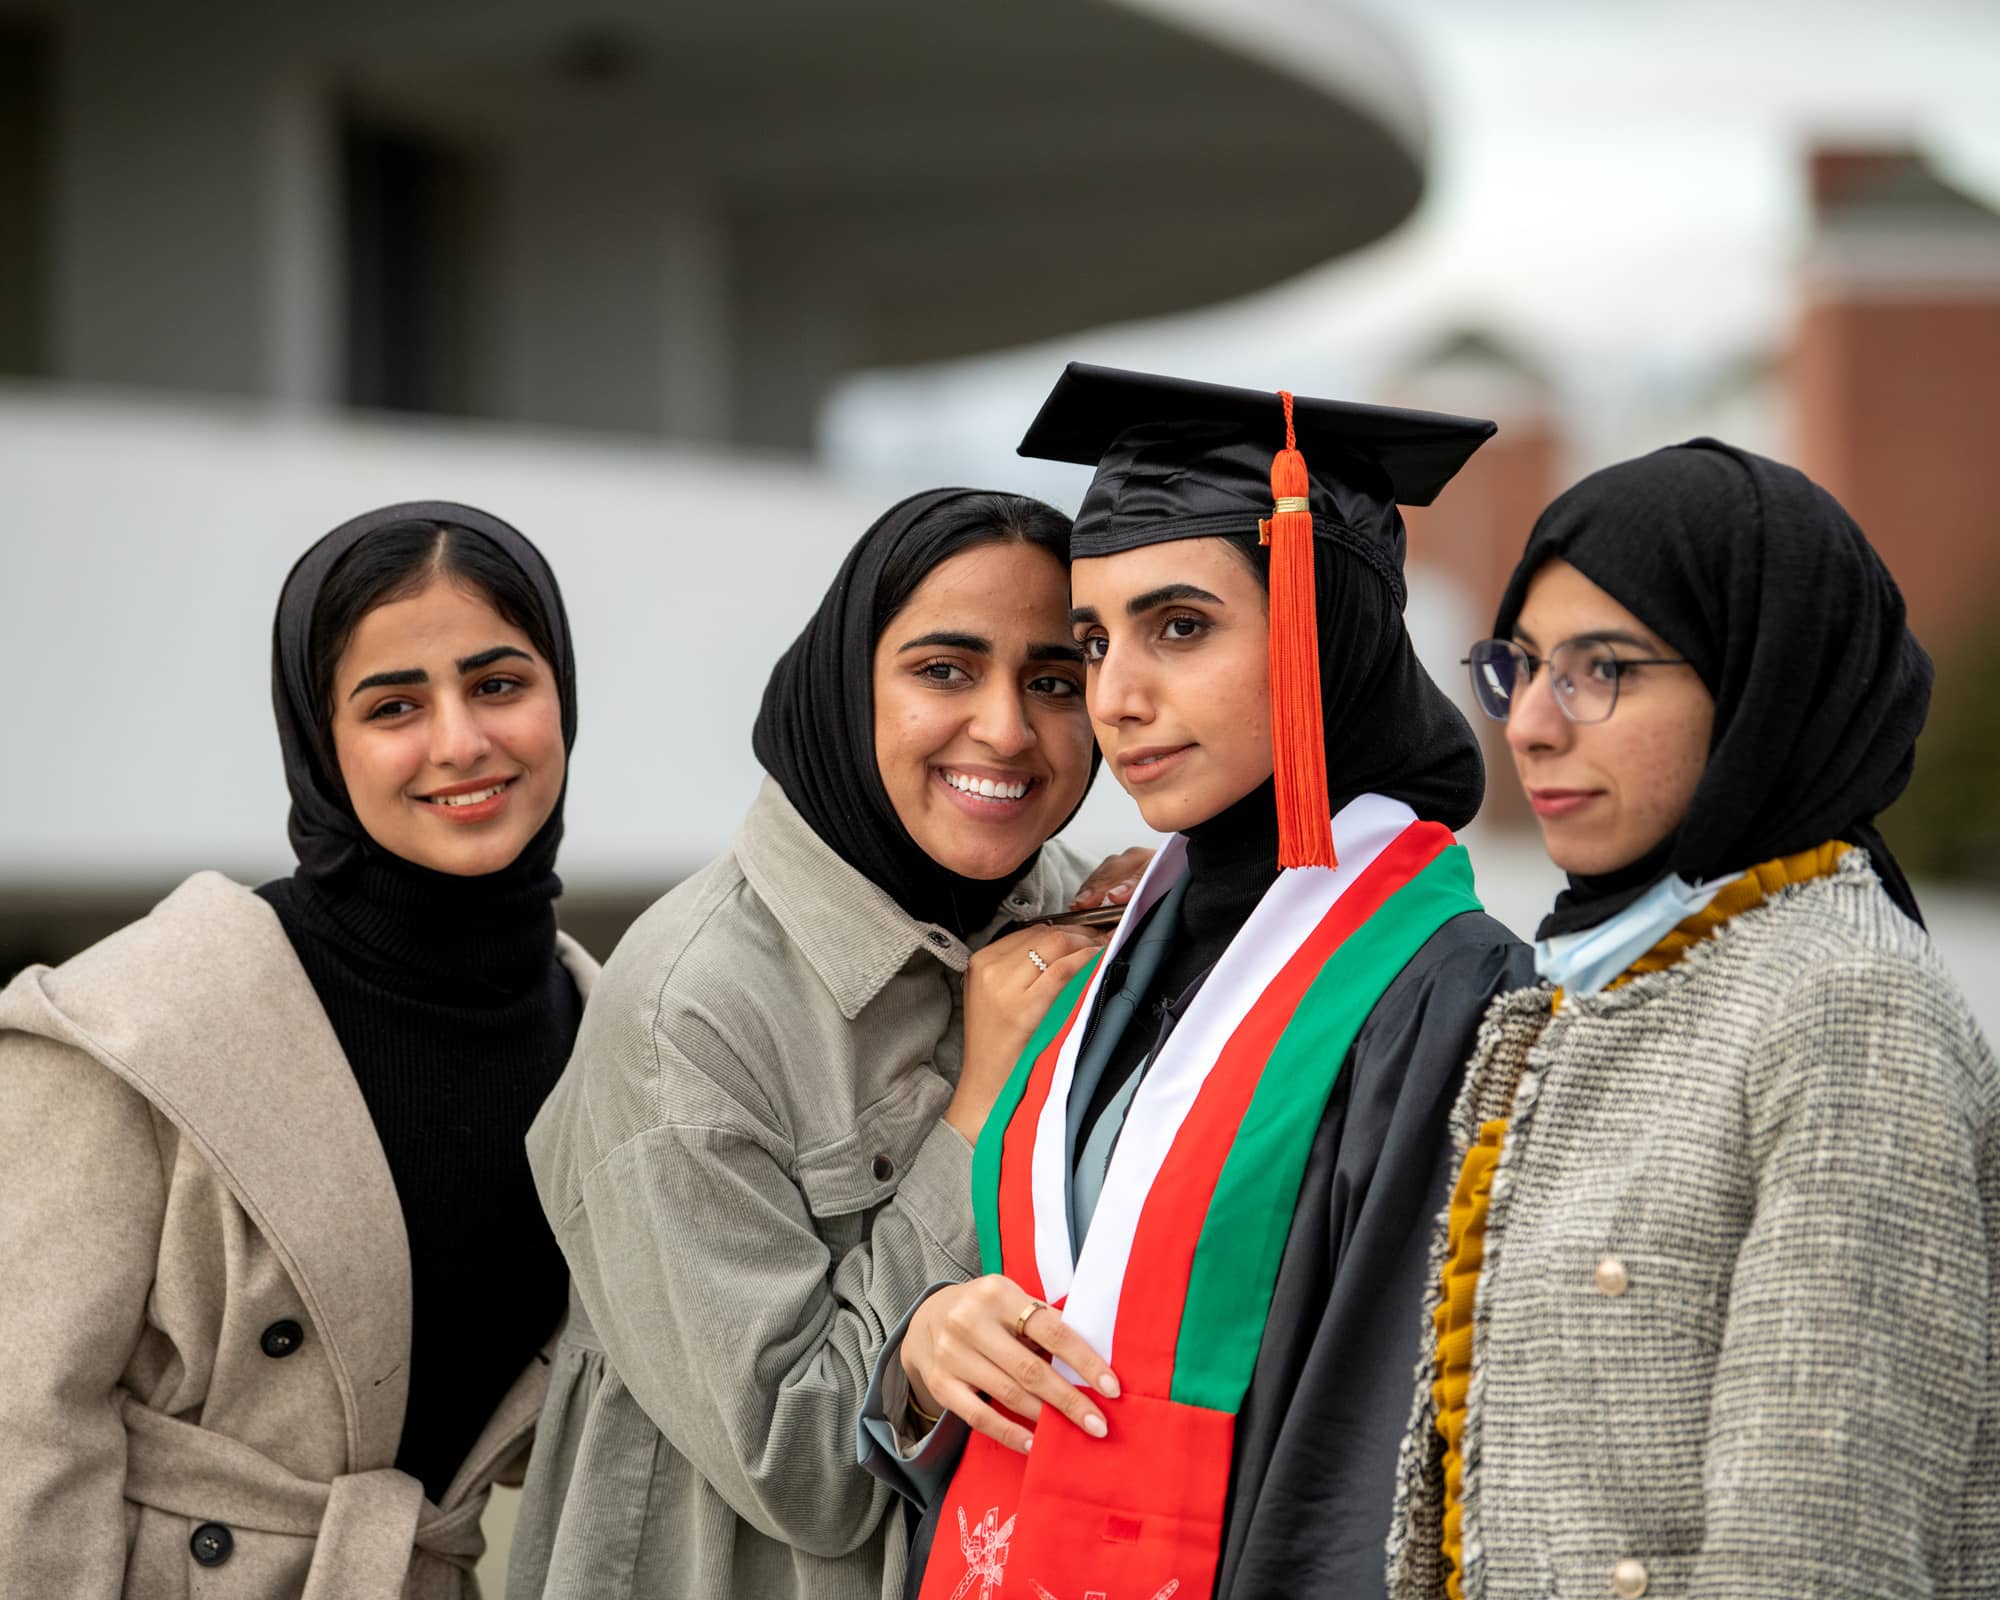 Recent graduate Shatha Mohammed Abdallah Al Balushi, center, has her photo taken by a friend after the Fall Commencement 2021 at the Athens Campus.